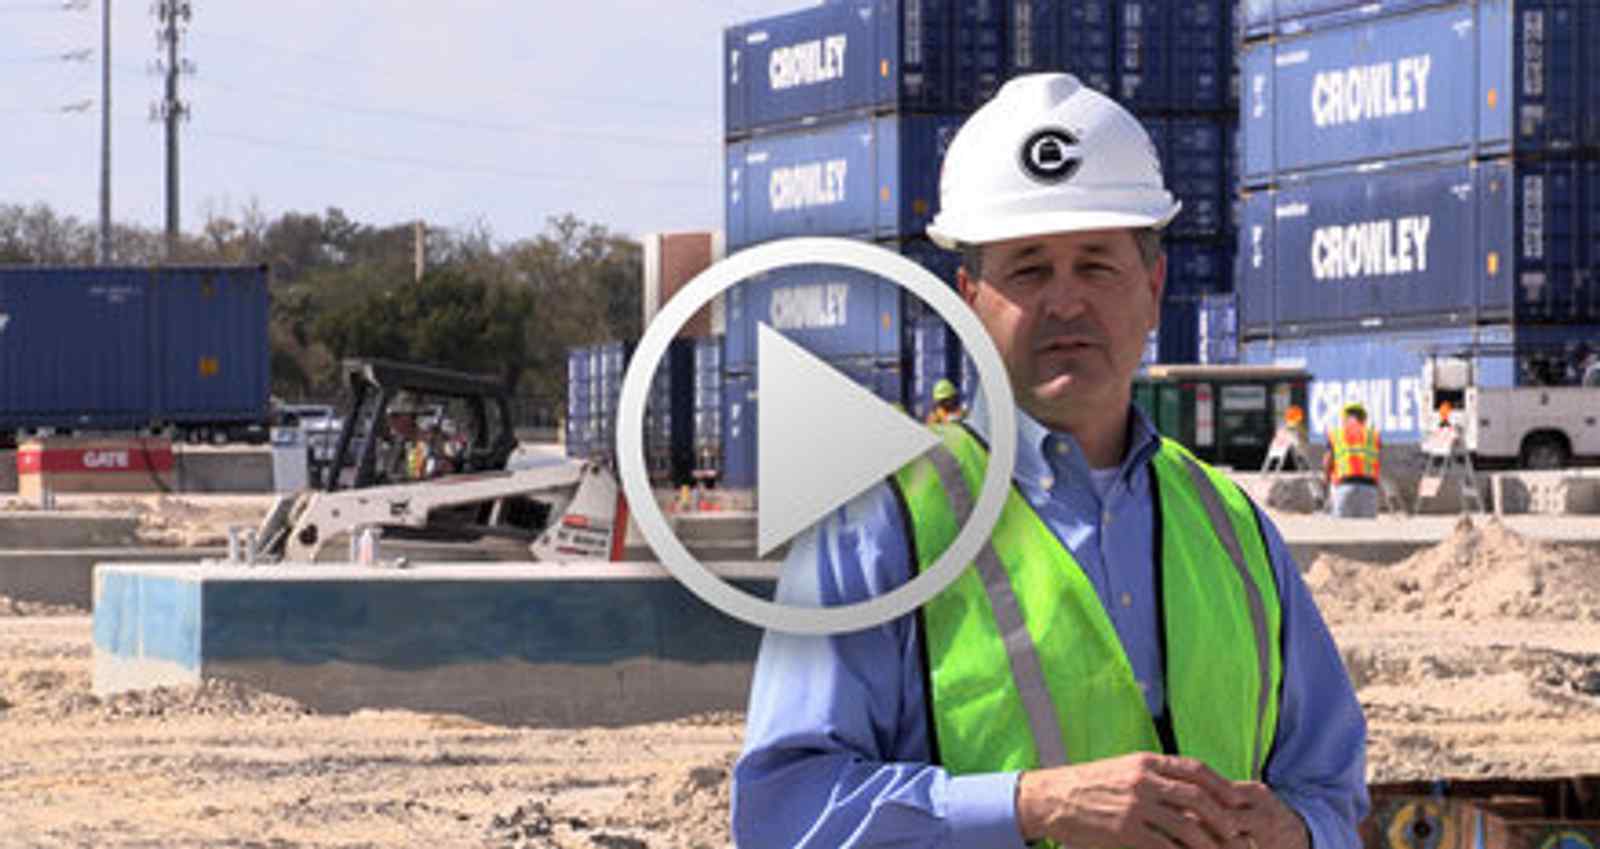 Video Highlights Construction of Crowley’s LNG Bunker Facility at Port of Jacksonville